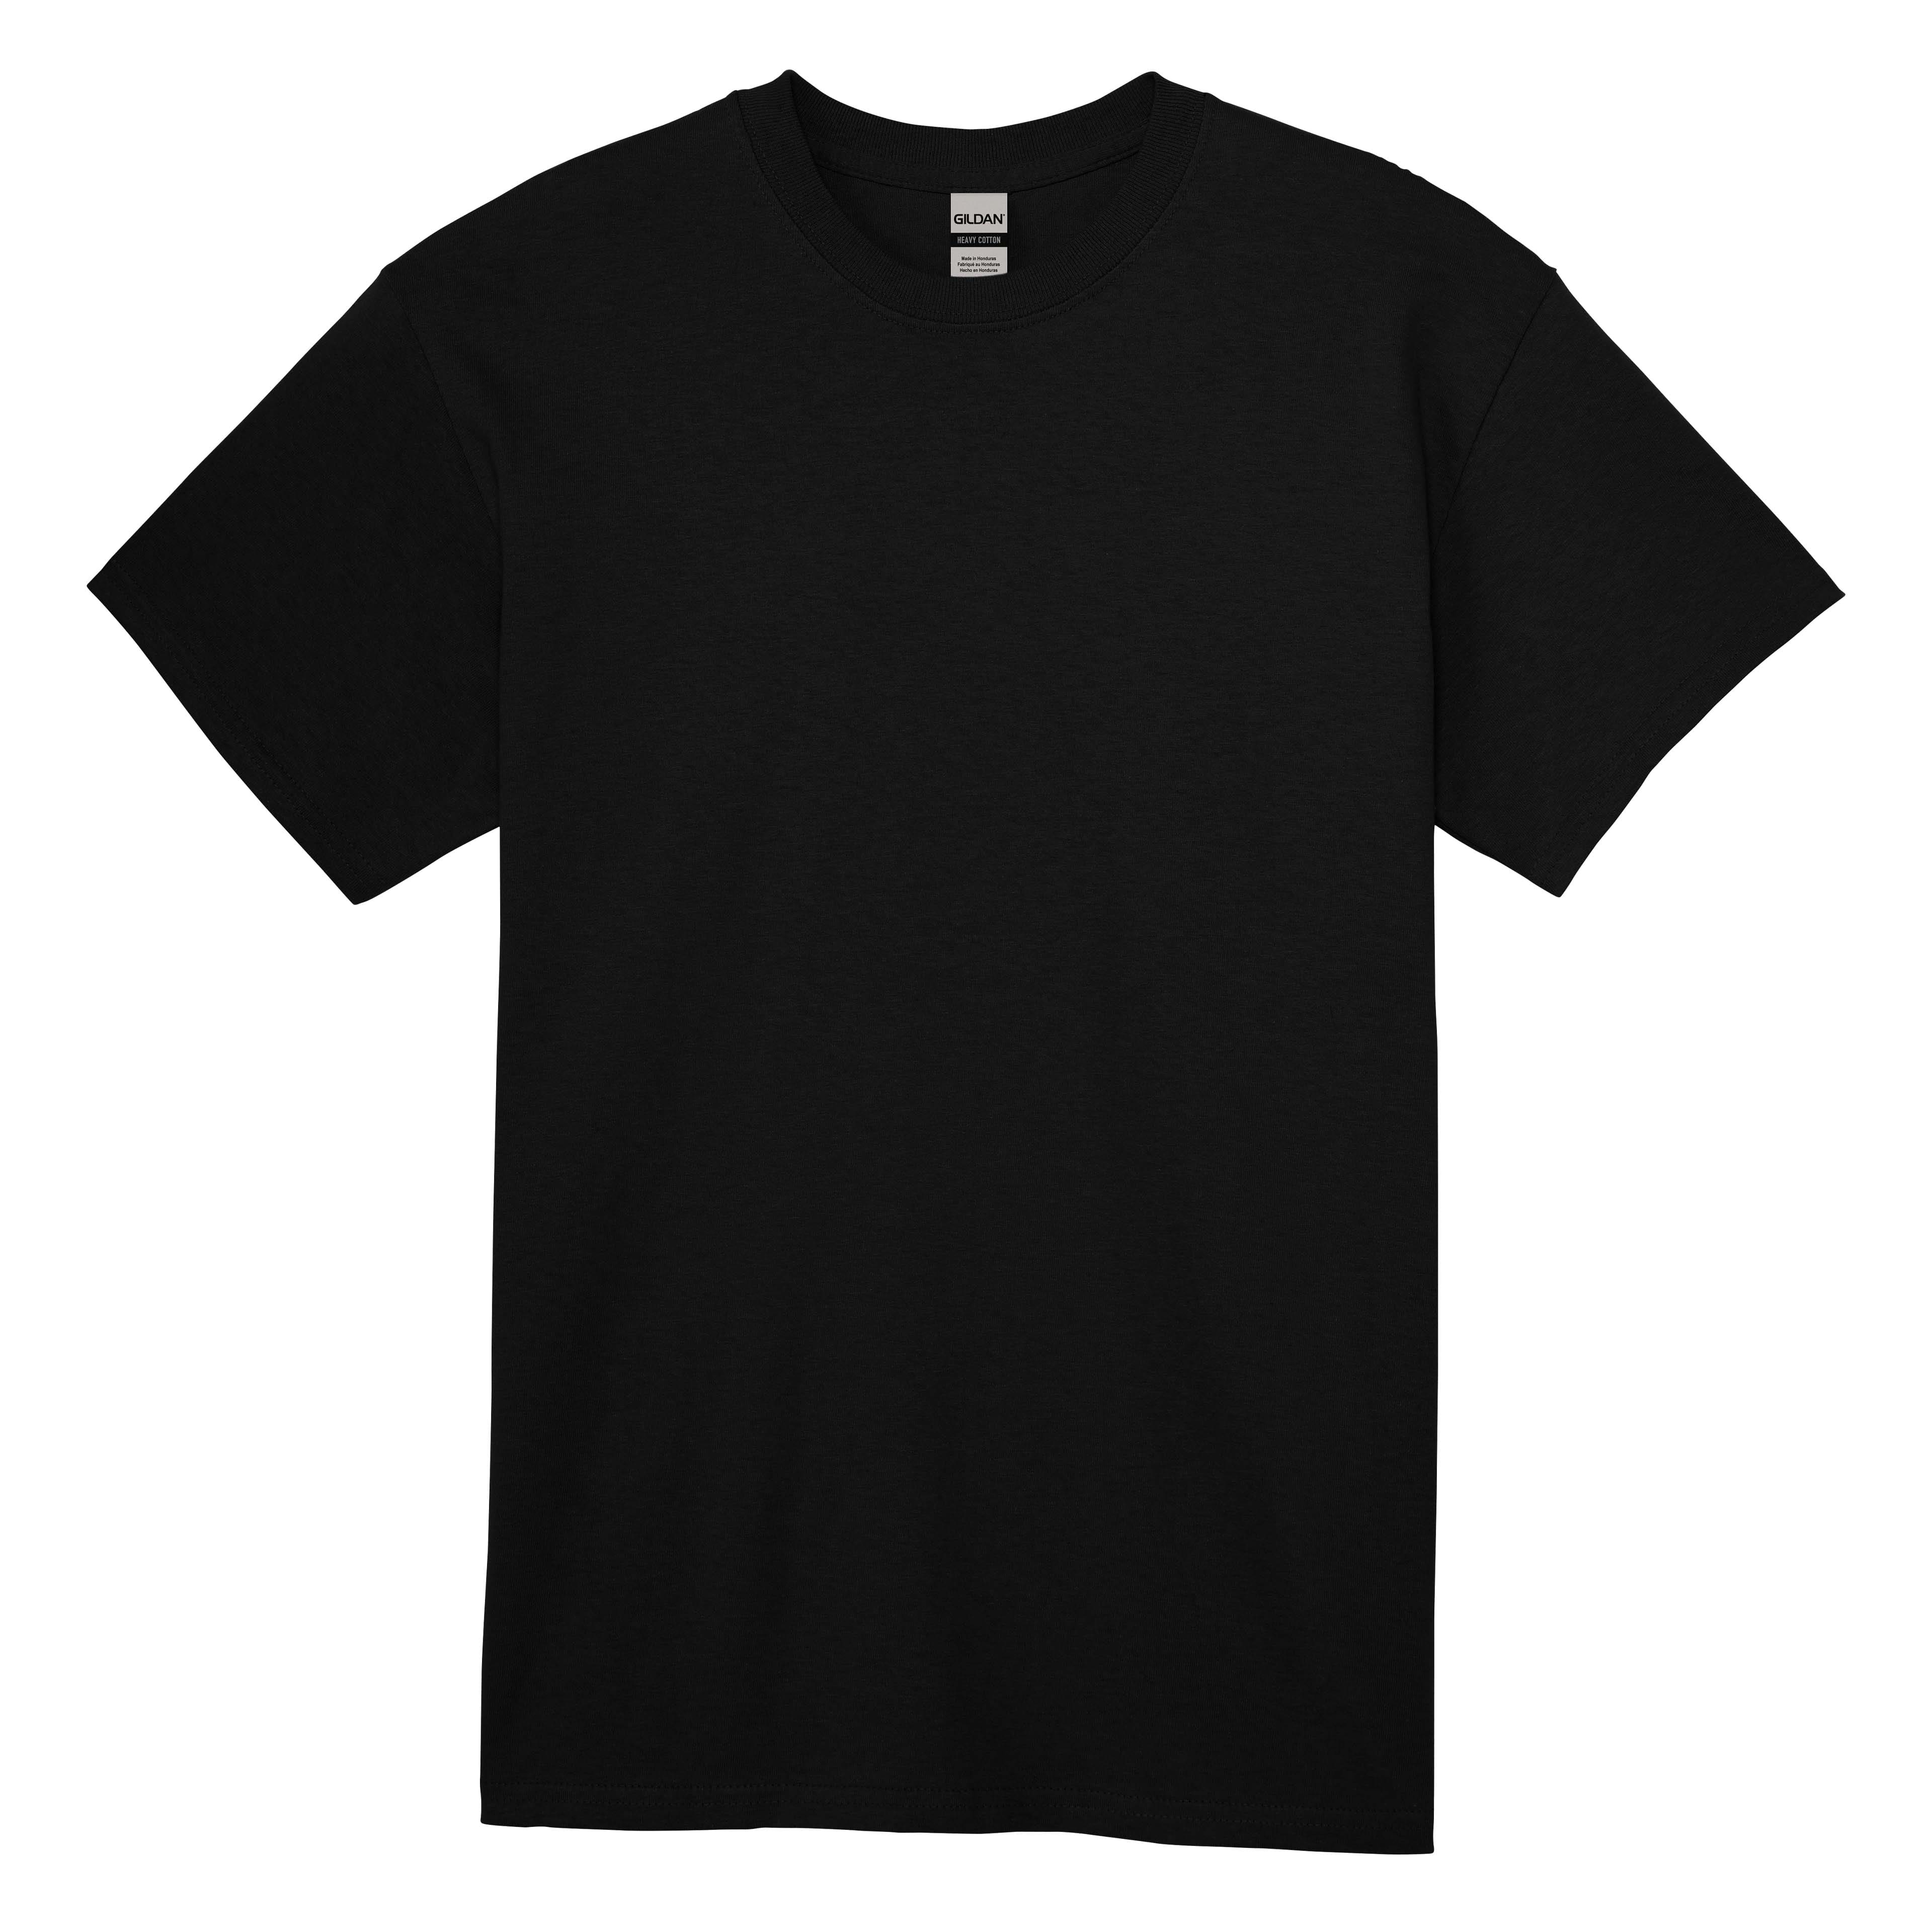 Hanes Our Most Comfortable Mens Solid Plain Black Short Sleeve